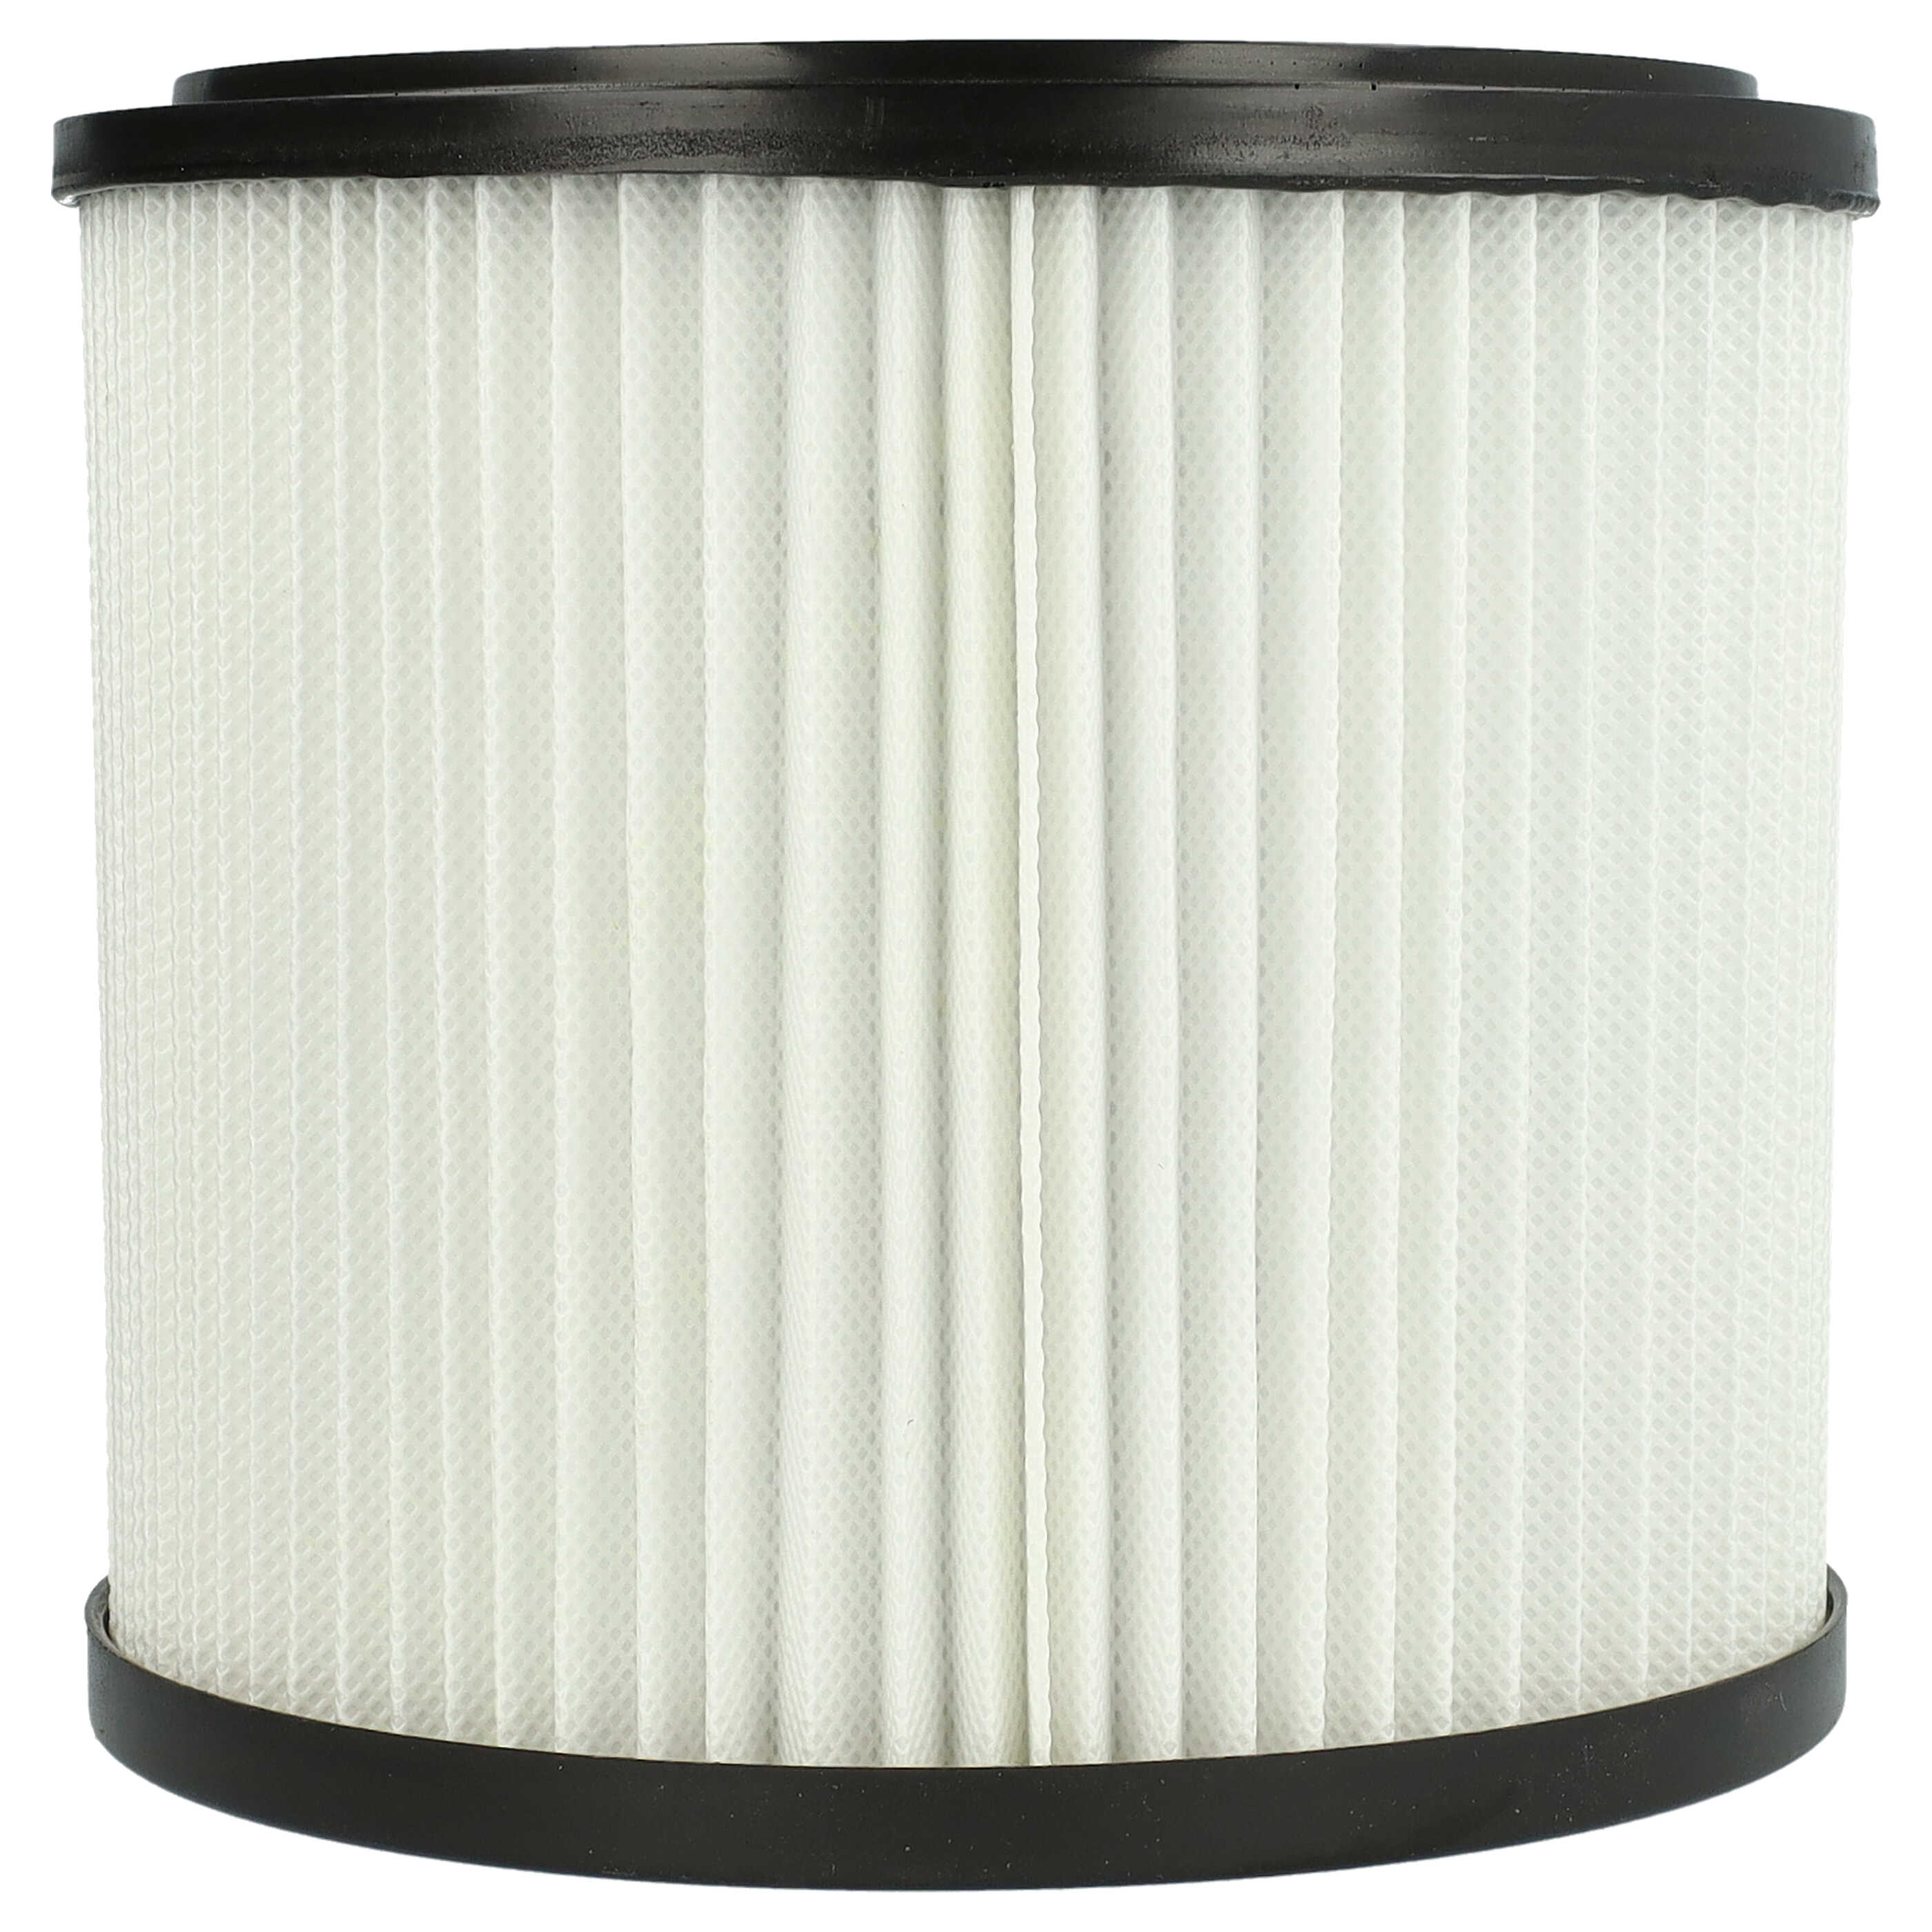 1x cartridge filter replaces Einhell 2351110 for LIVVacuum Cleaner, black / white